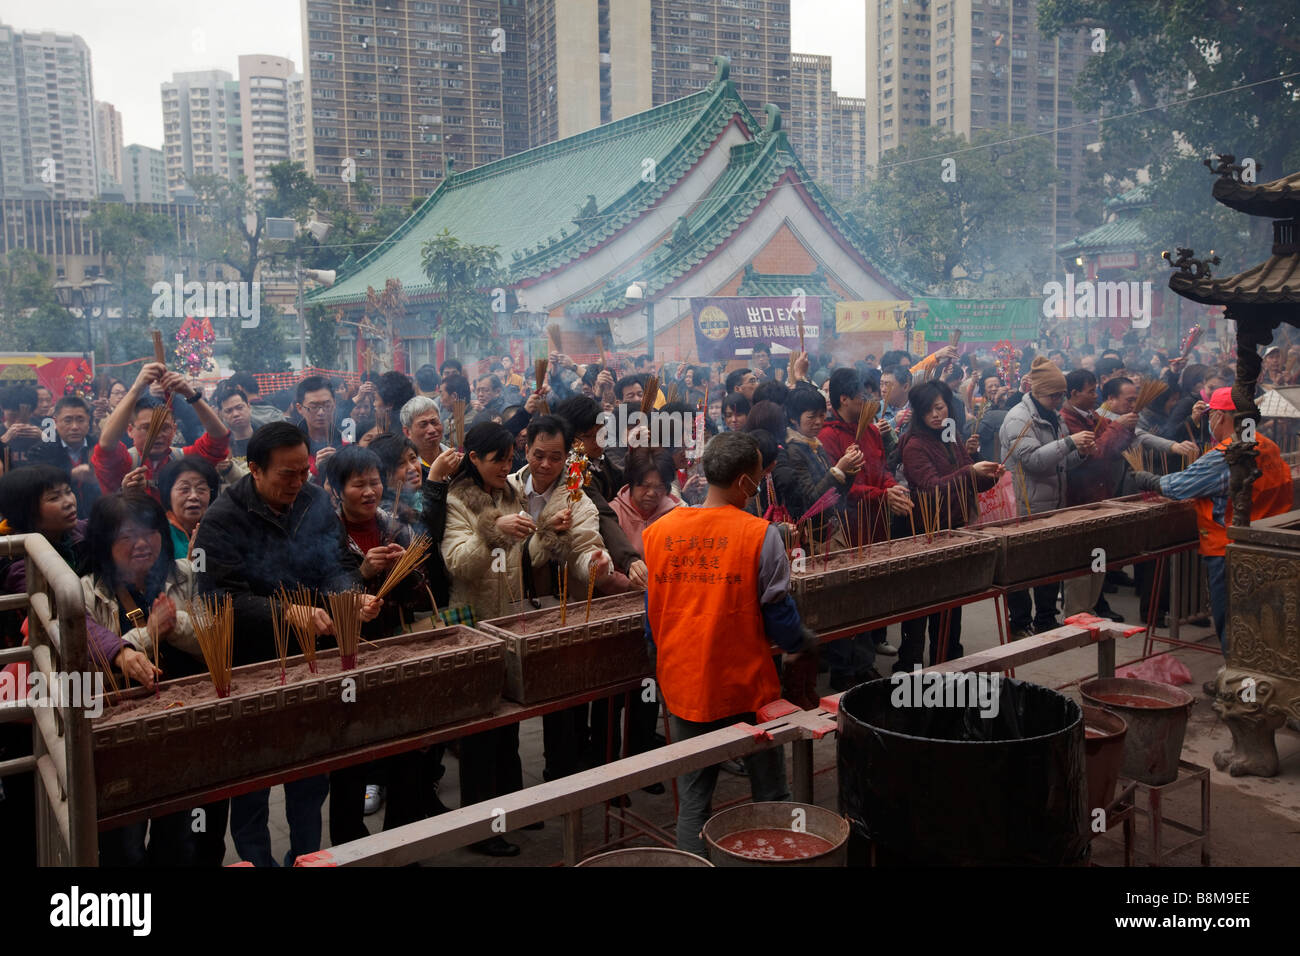 During the Lunar New Year, crowds of worshippers and devotees flock to ...